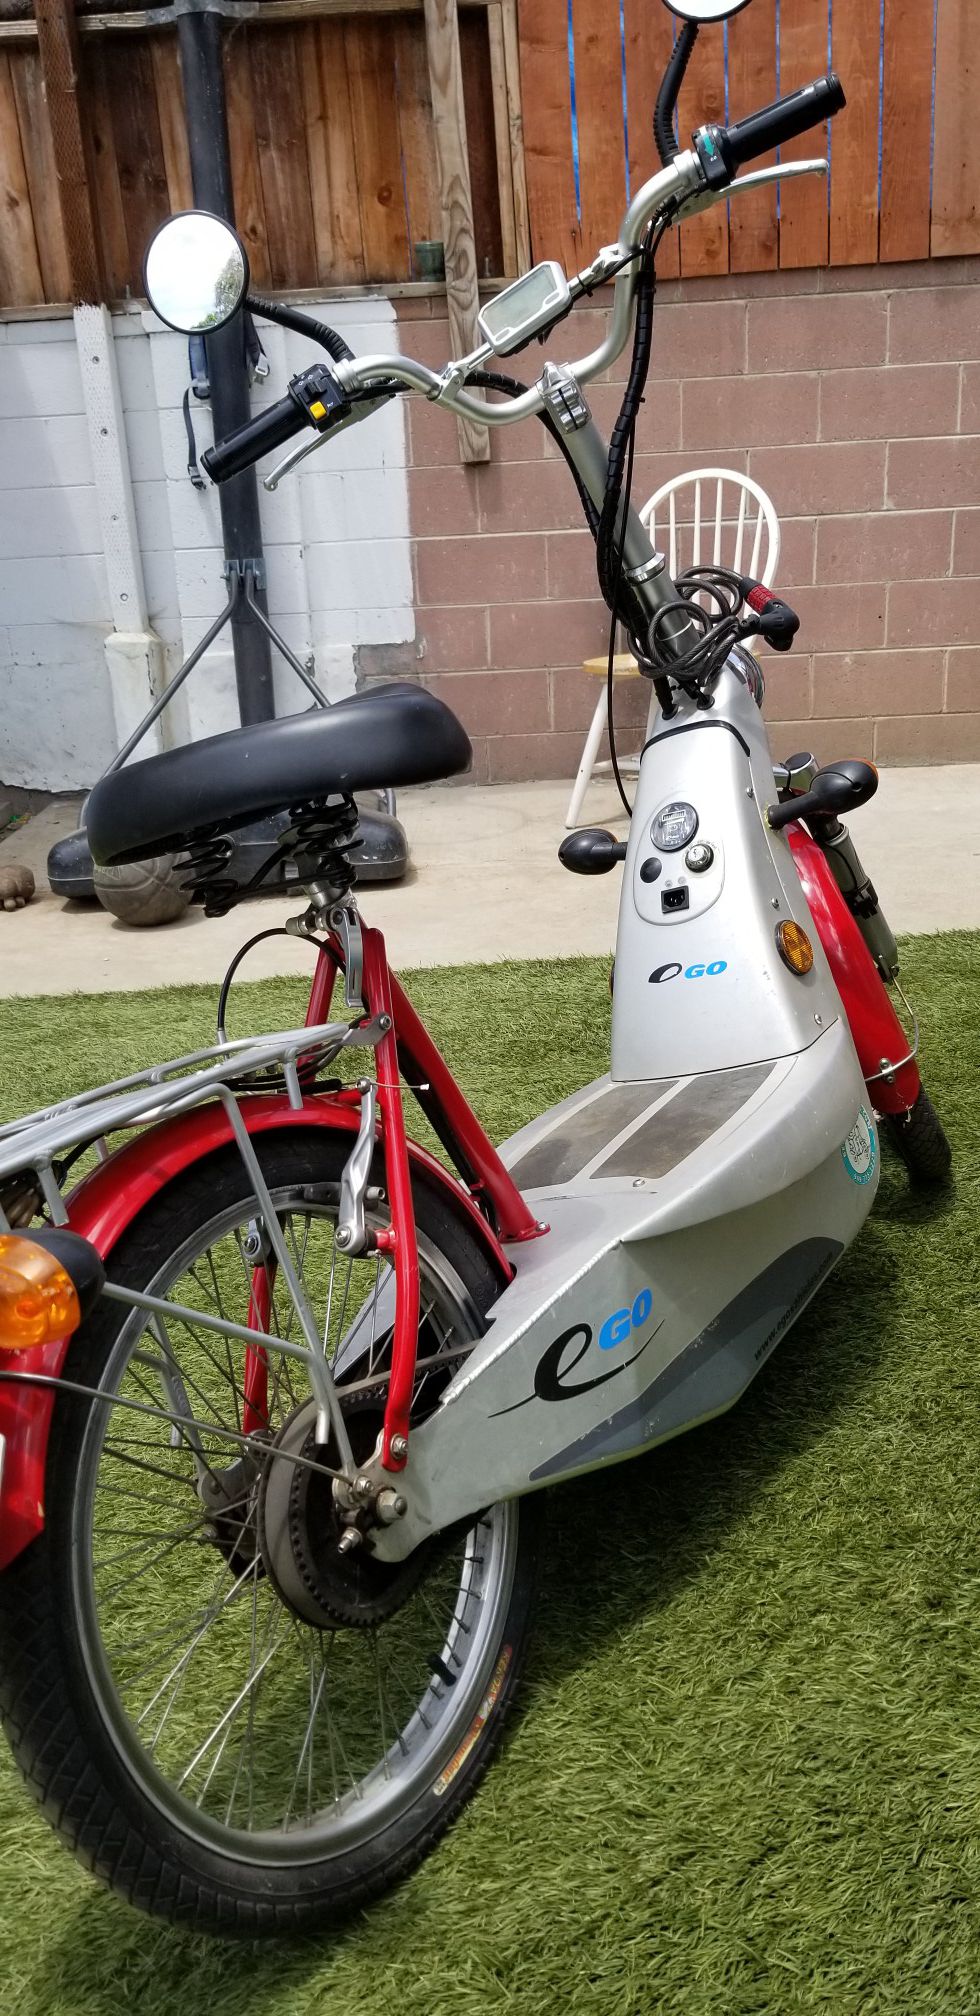 Ego electric Vehicle scooter